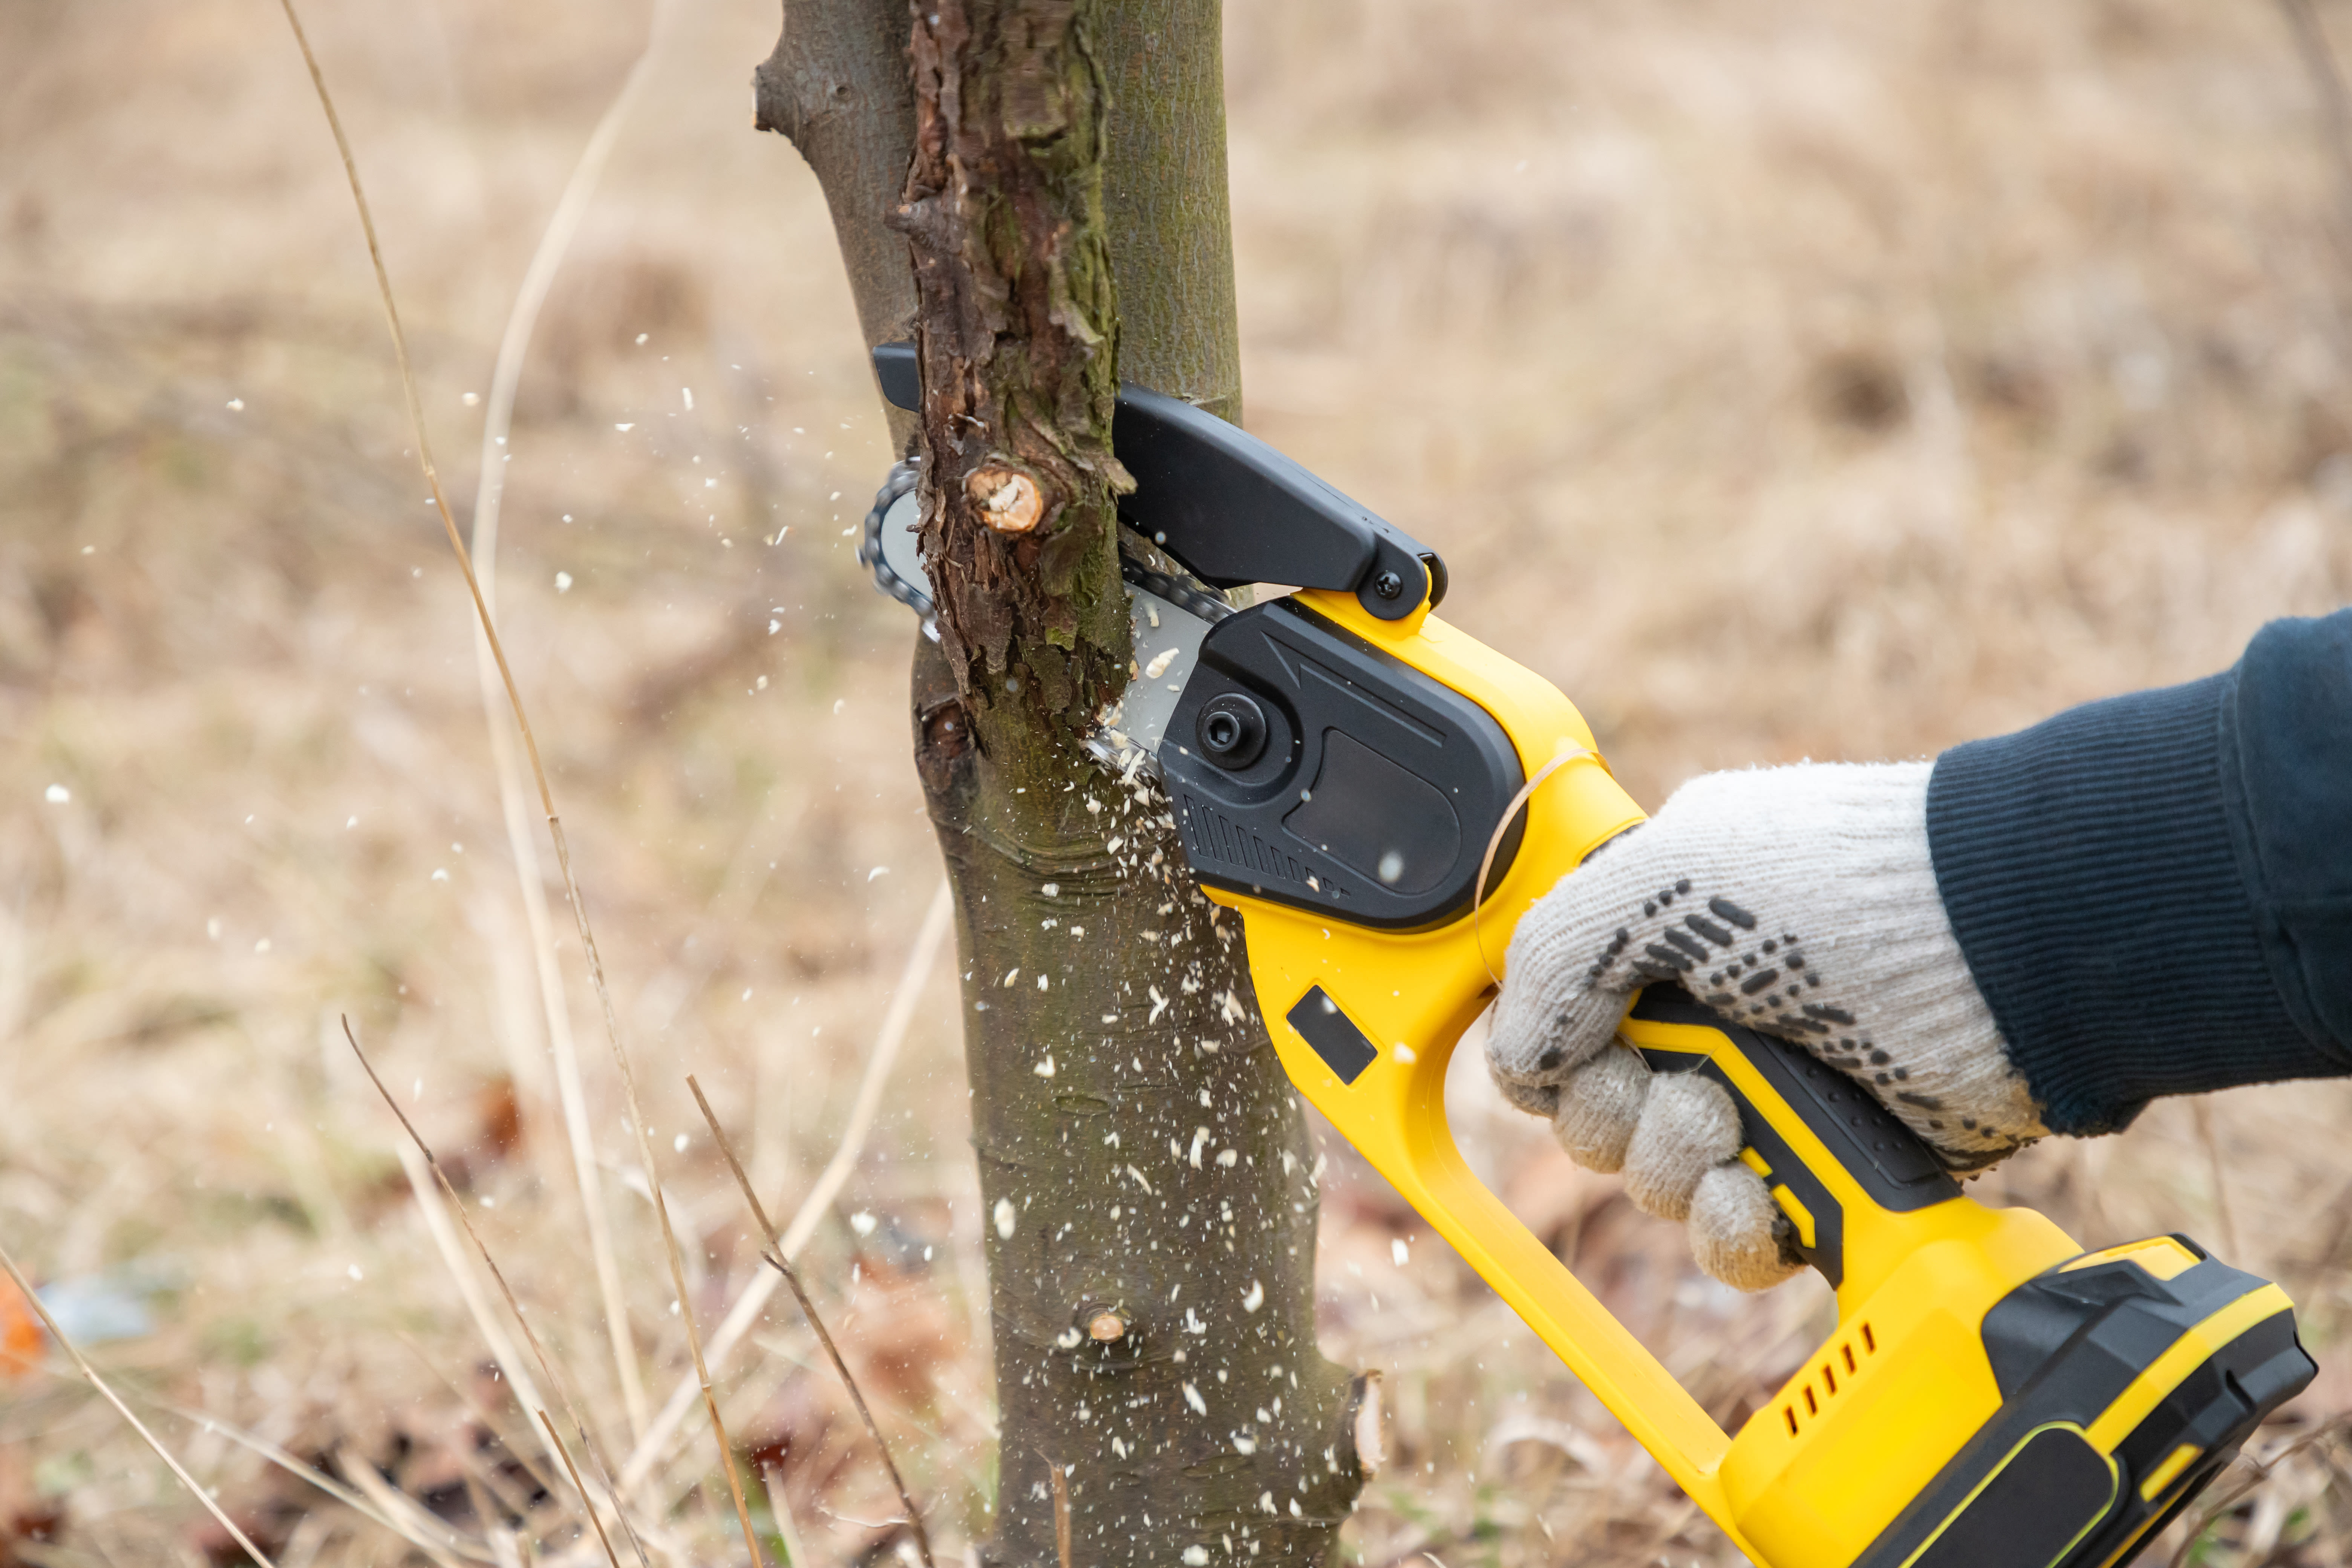 Sales of this 'powerful' mini chainsaw have risen 20,000% on Amazon Canada — and it's under $120